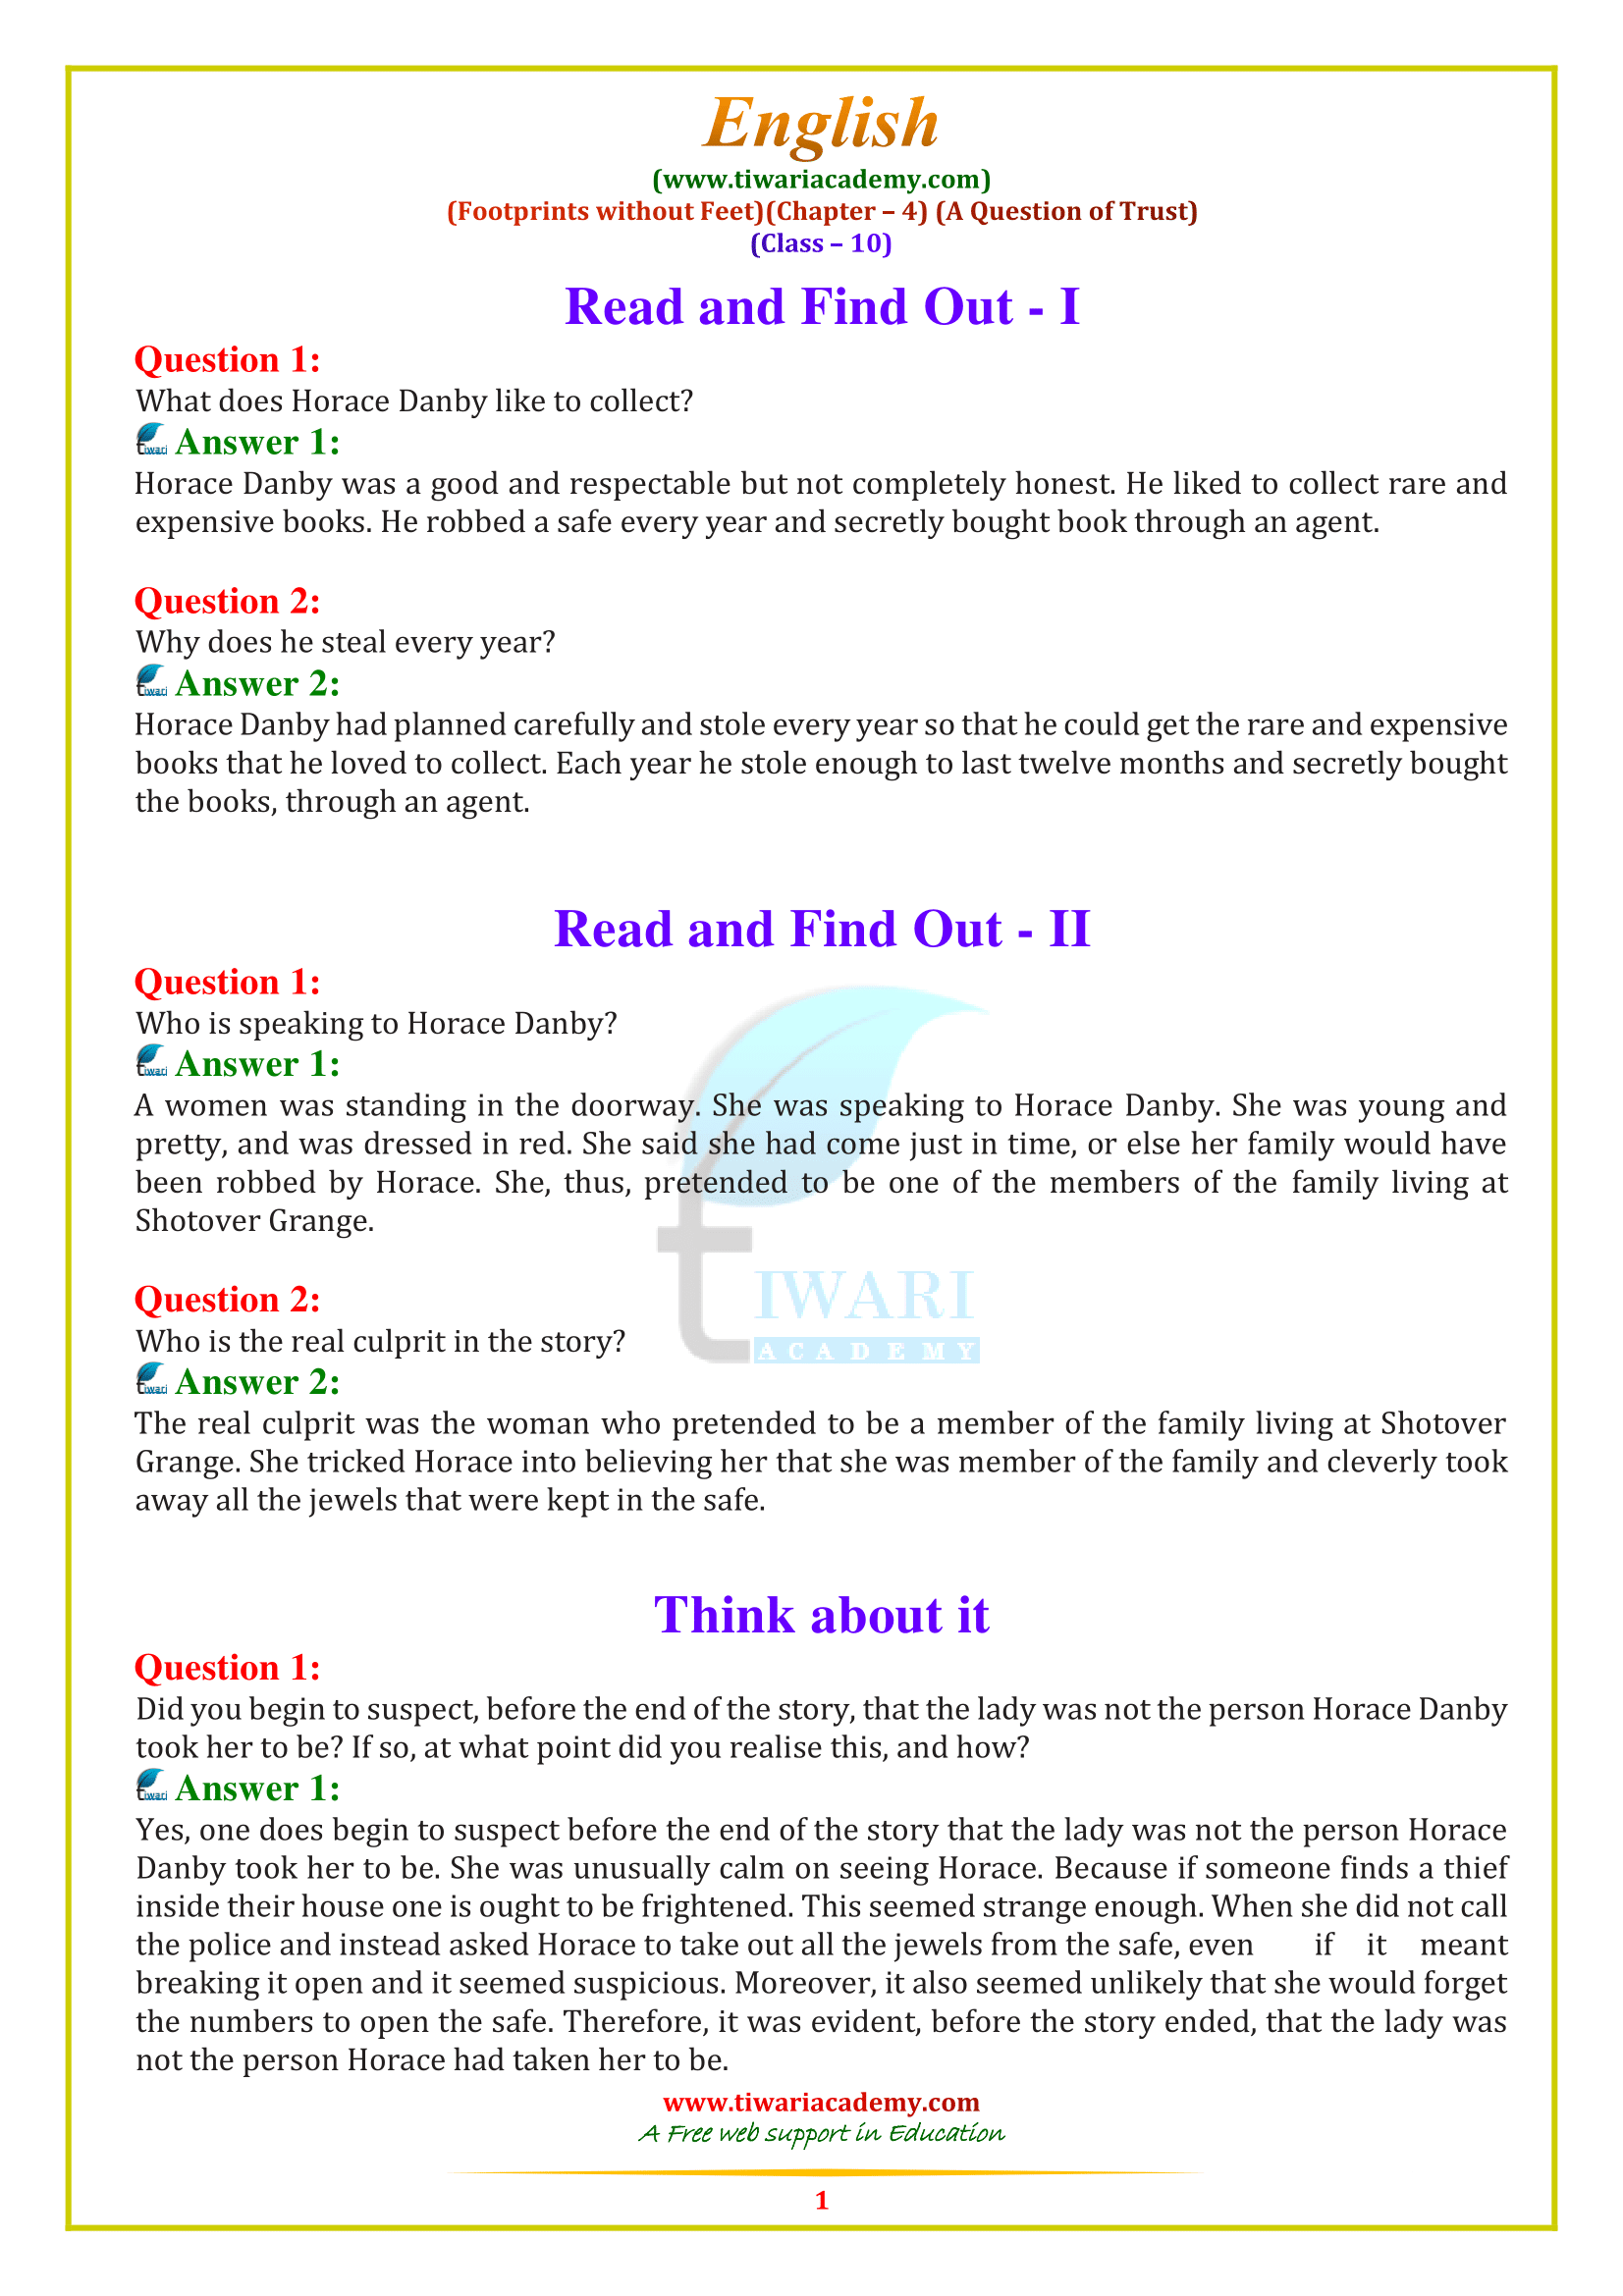 NCERT Solutions for Class 10 English Footprints without feet chapter 4